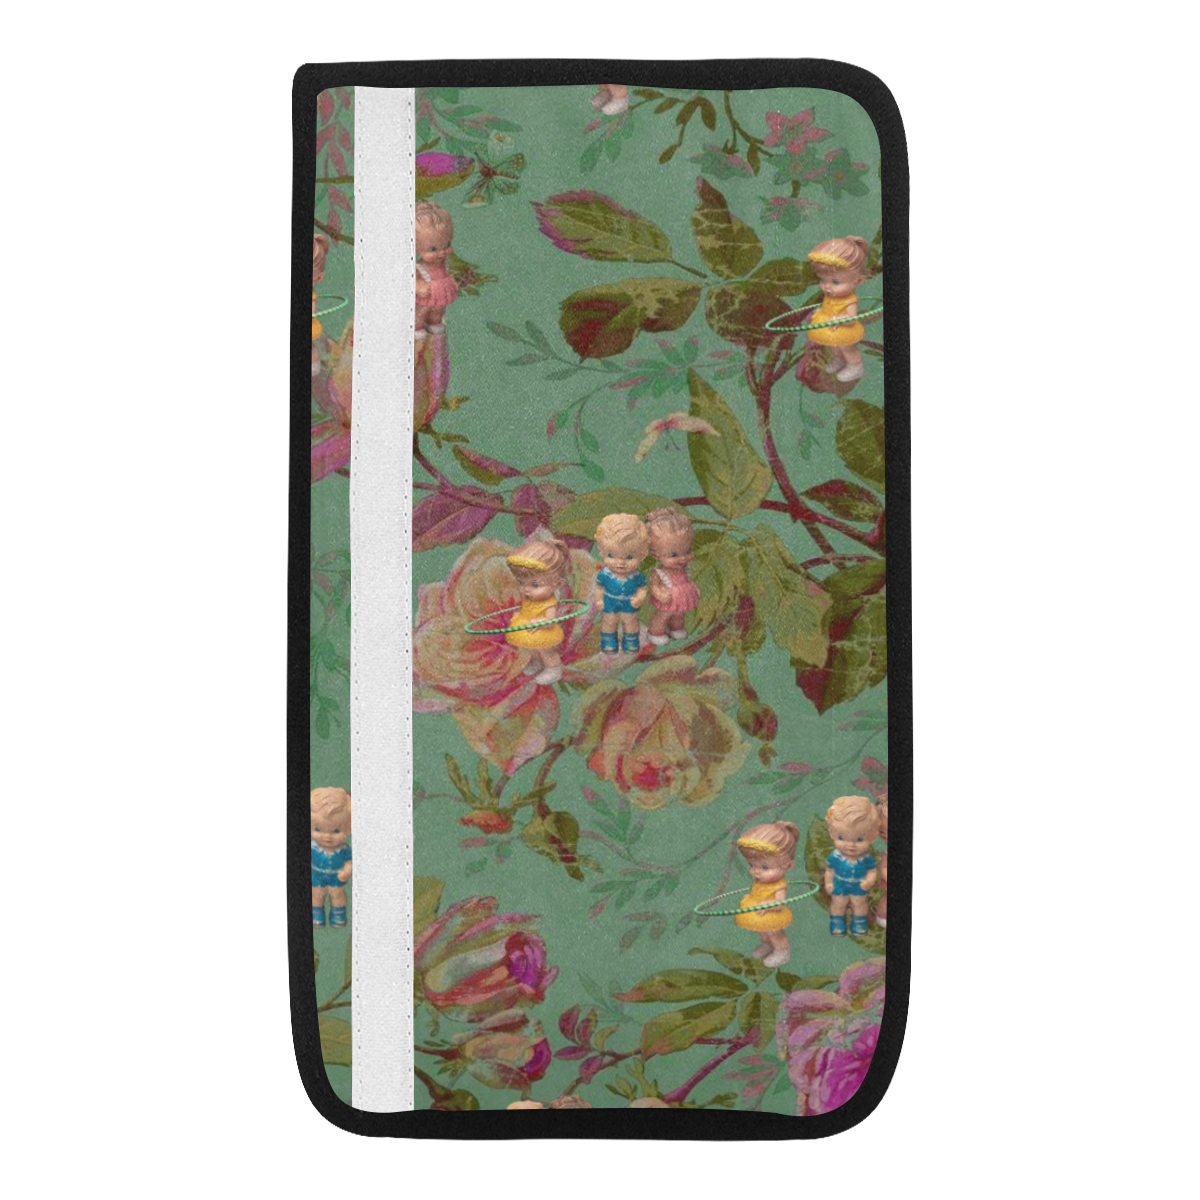 Hooping in the Rose Garden Car Seat Belt Cover 7''x12.6''